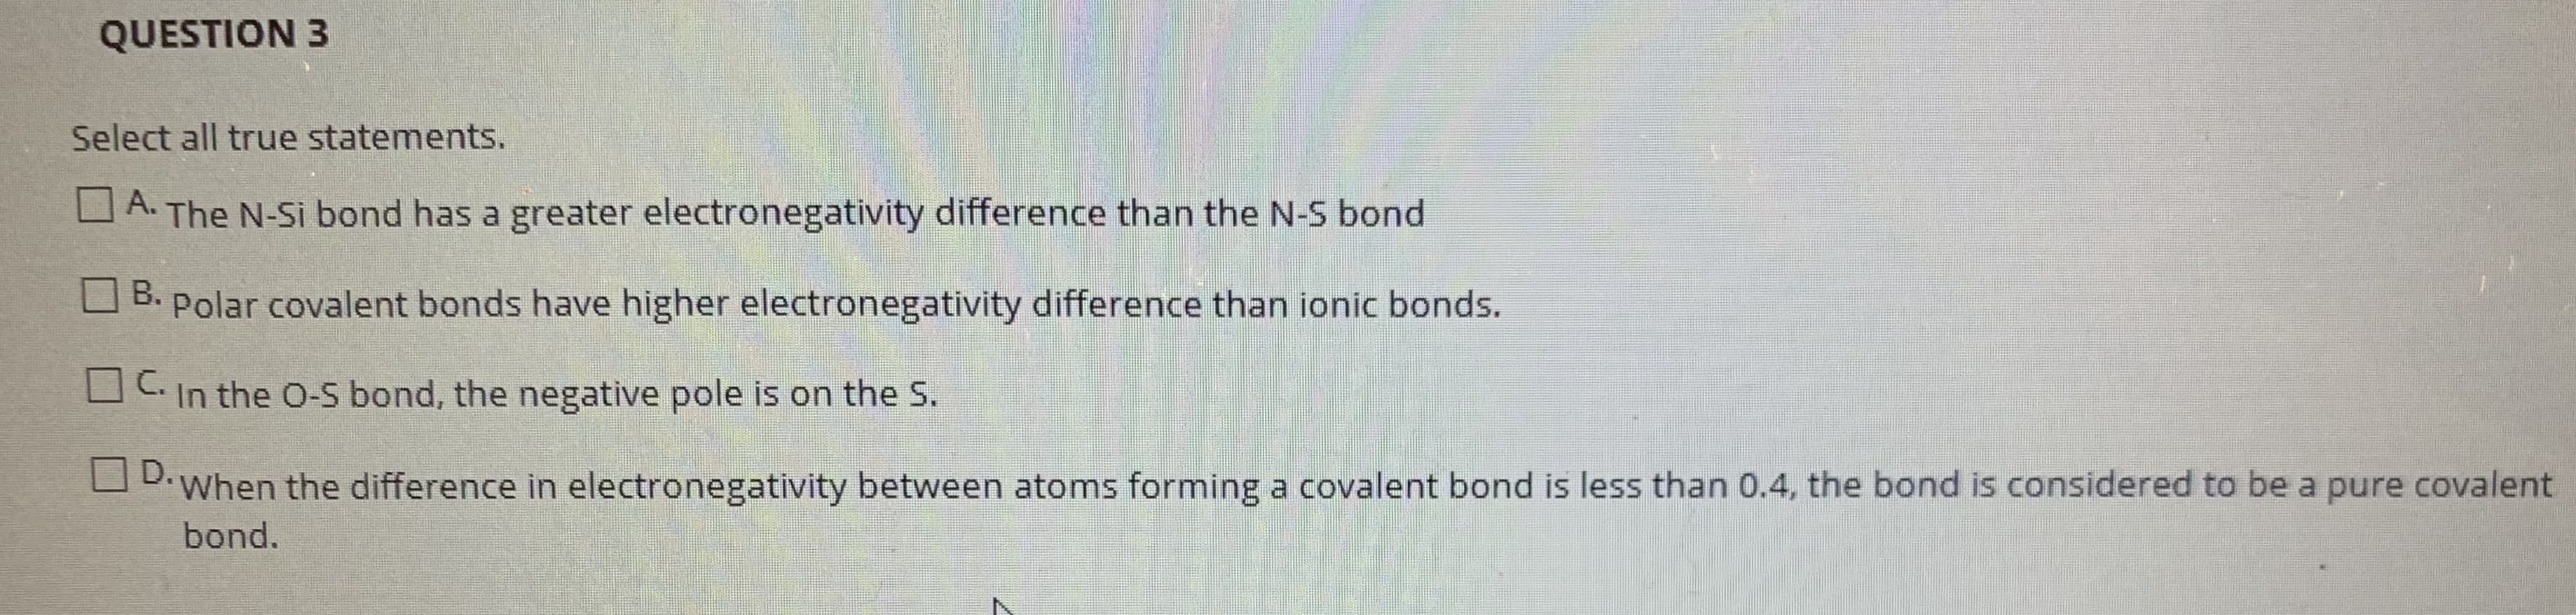 Select all true statements.
O A. The N-Si bond has a greater electronegativity difference than the N-S bond
O B.
Polar covalent bonds have higher electronegativity difference than ionic bonds.
OC In the O-S bond, the negative pole is on the S.
